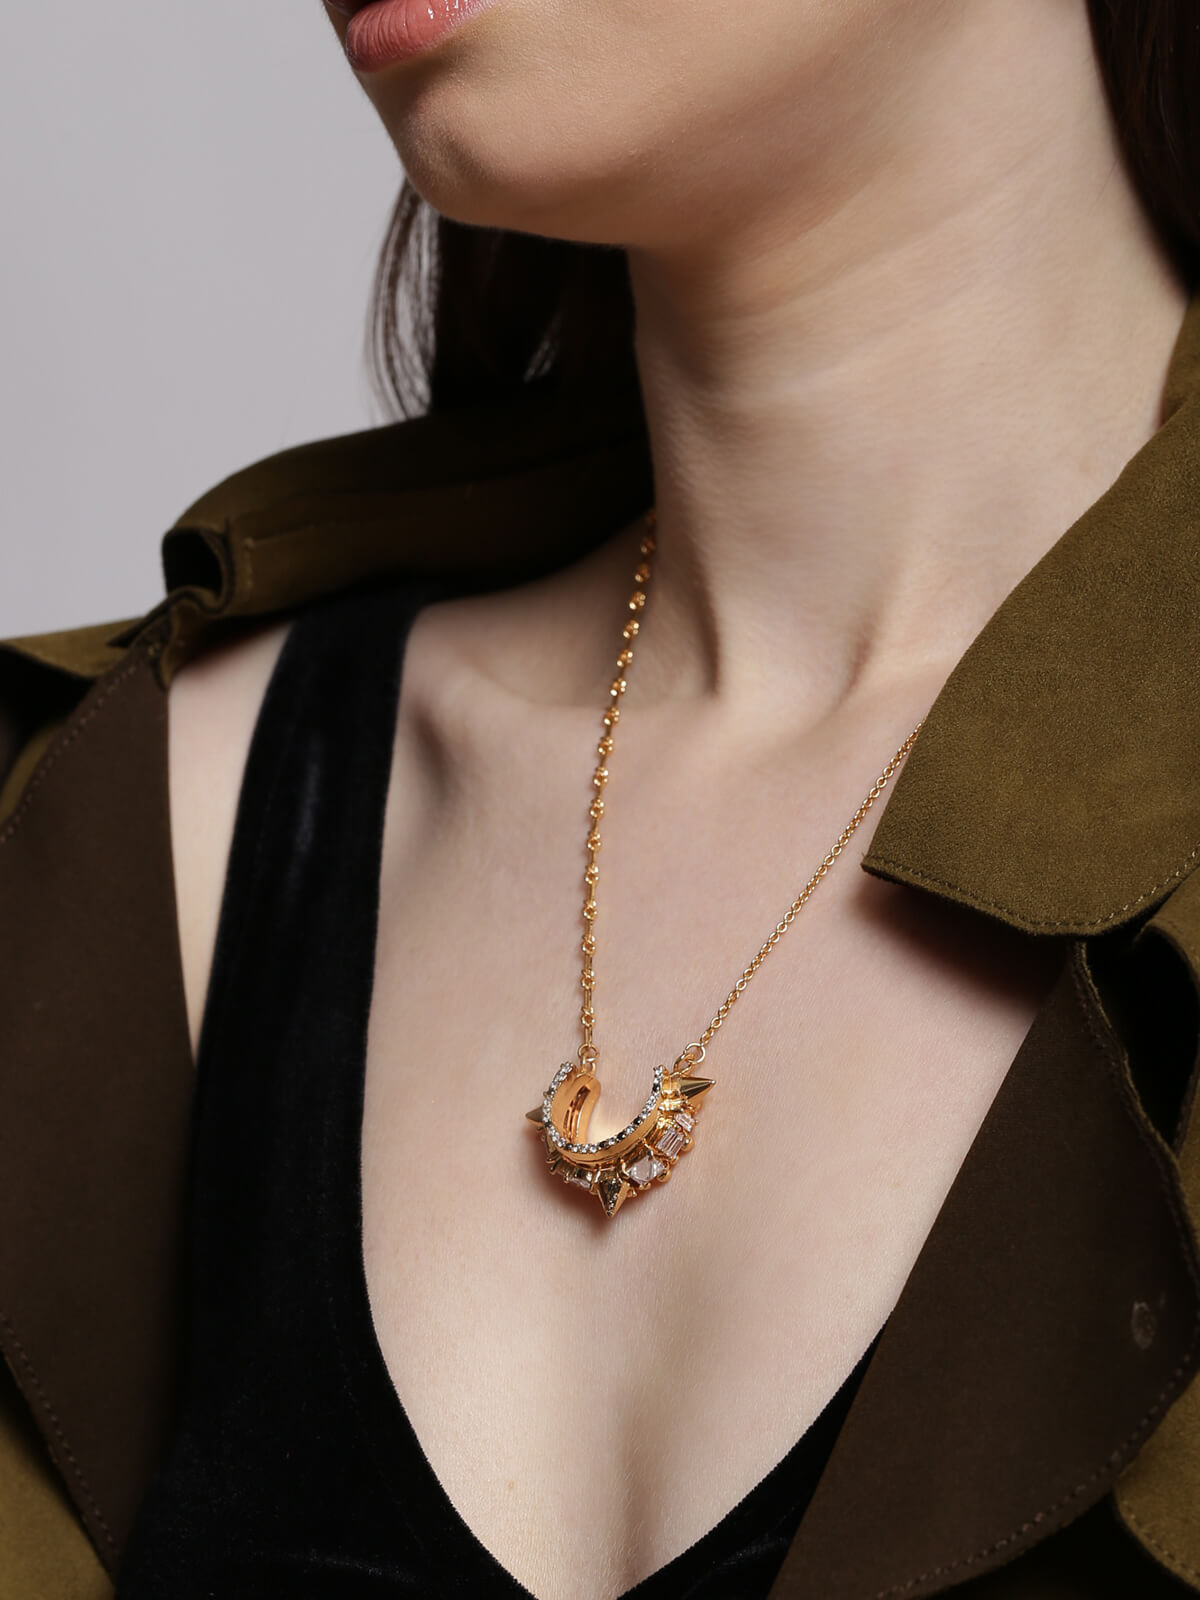 Necklaces - Chokers and Pearl Necklaces | CHANEL